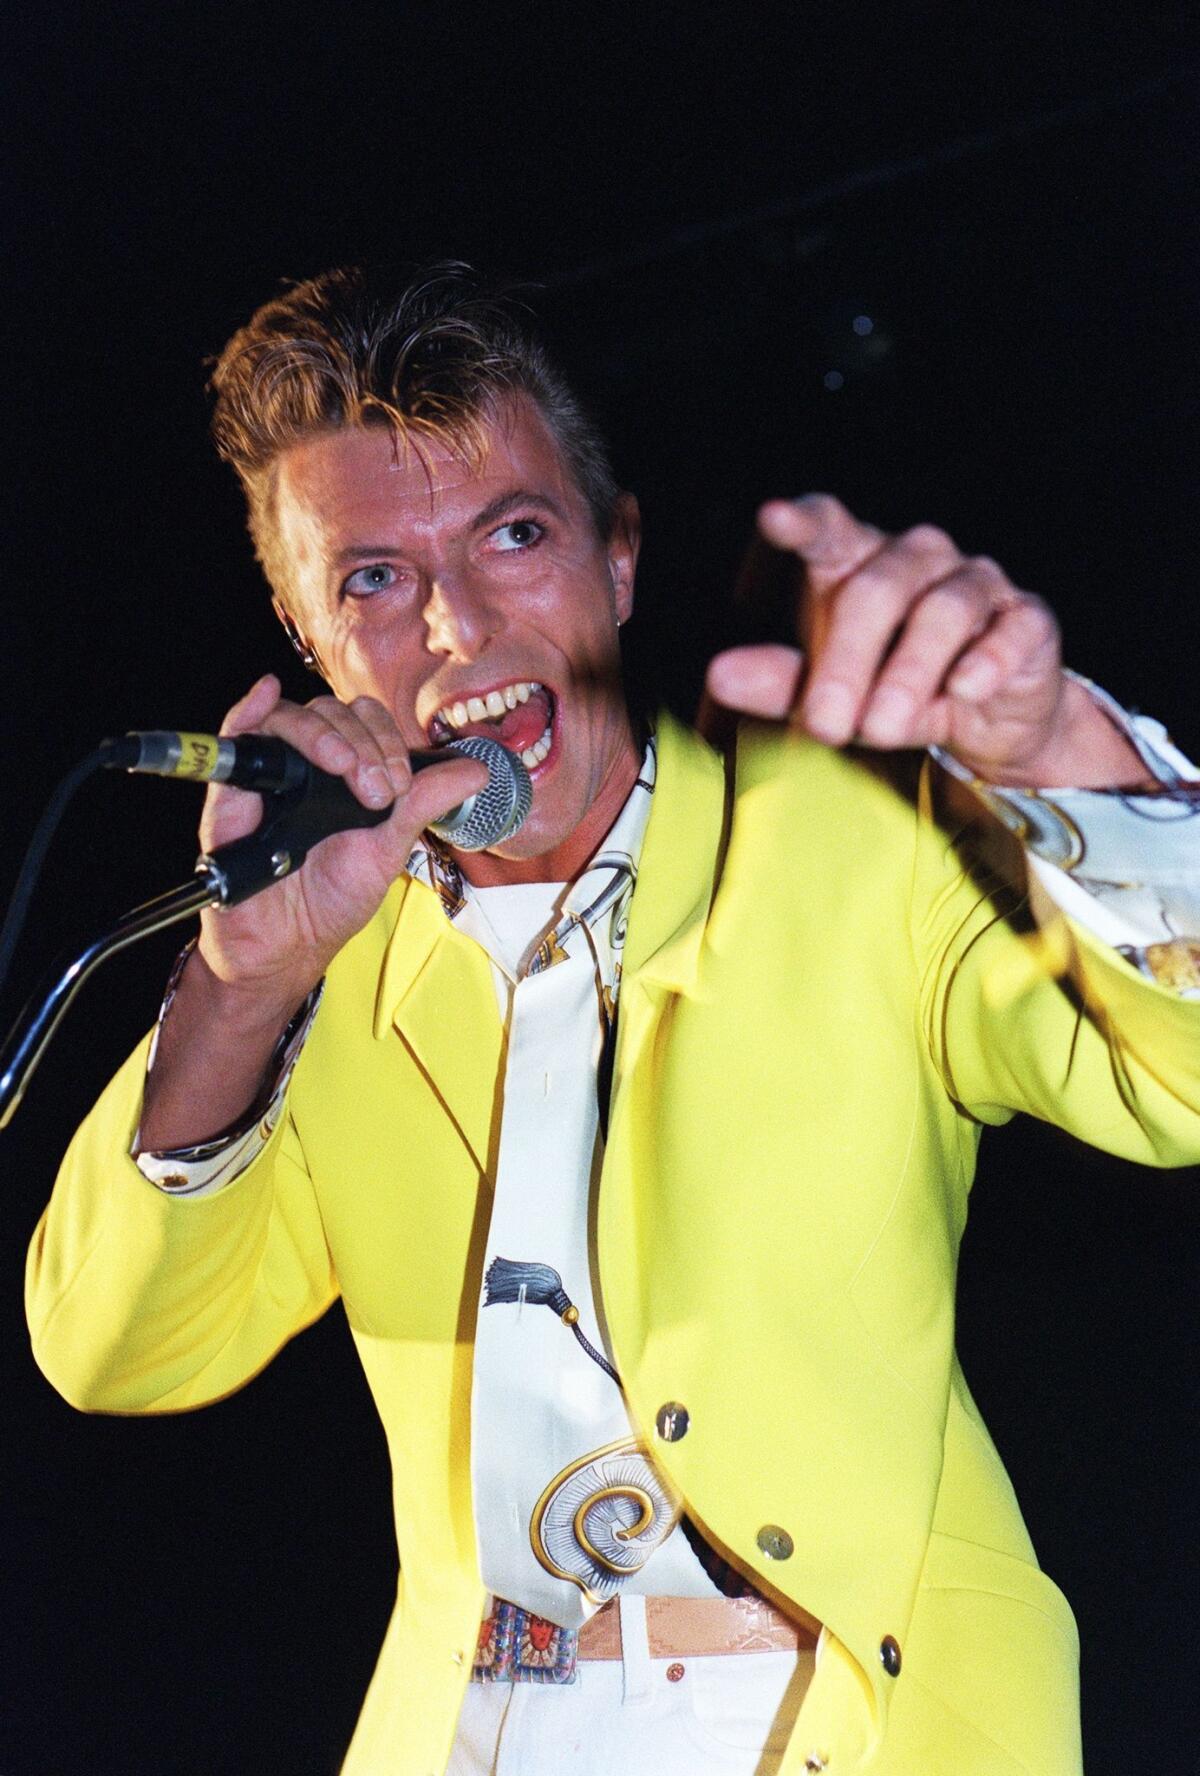 David Bowie performs at the Olympia concert hall in Paris on Oct. 29, 1991.